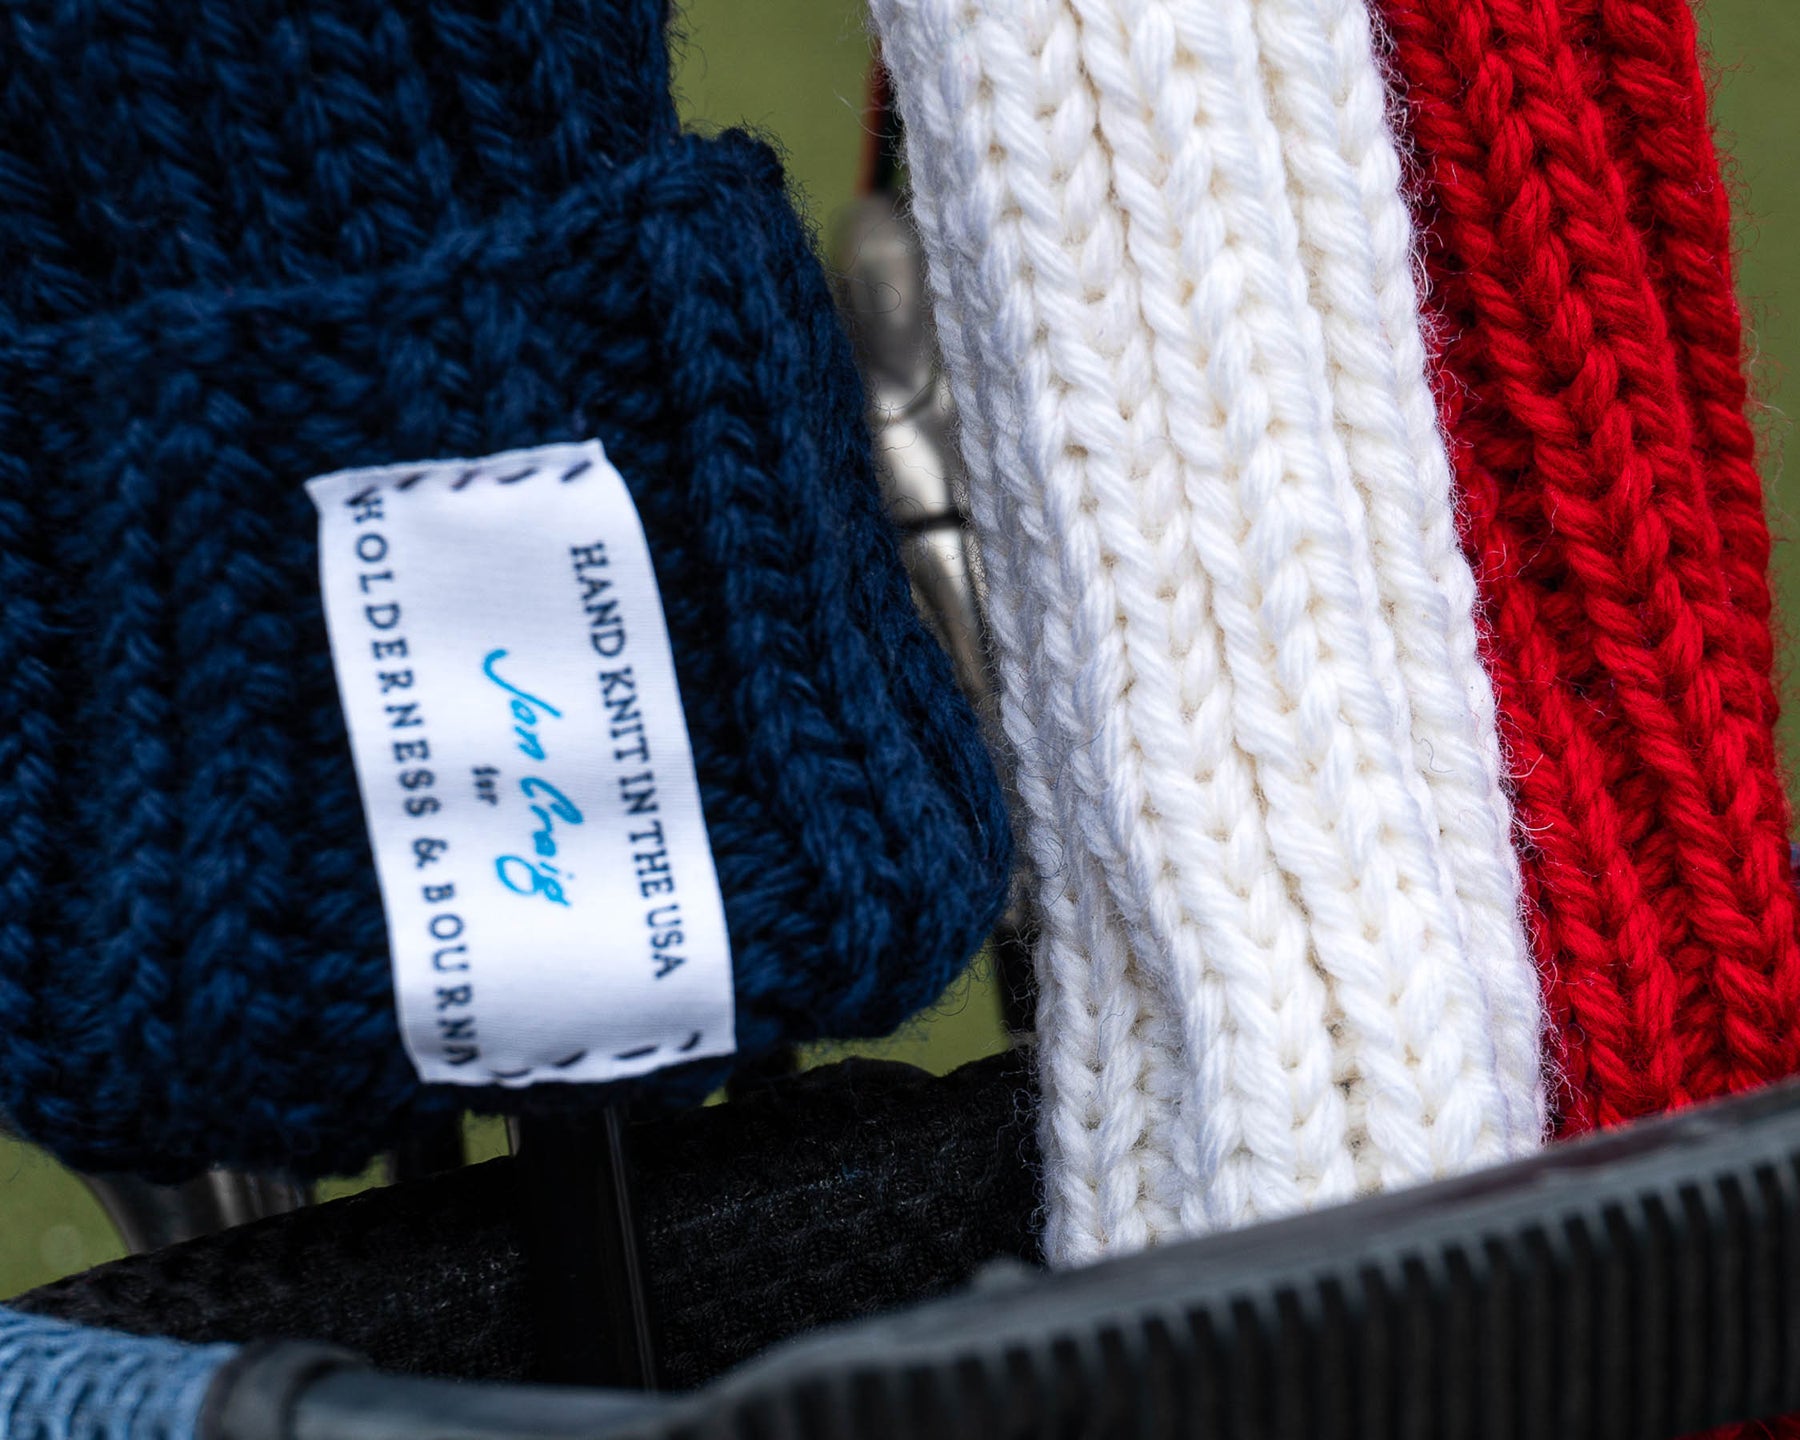 Close up shot of Holderness and Bourne custom knit headcovers.